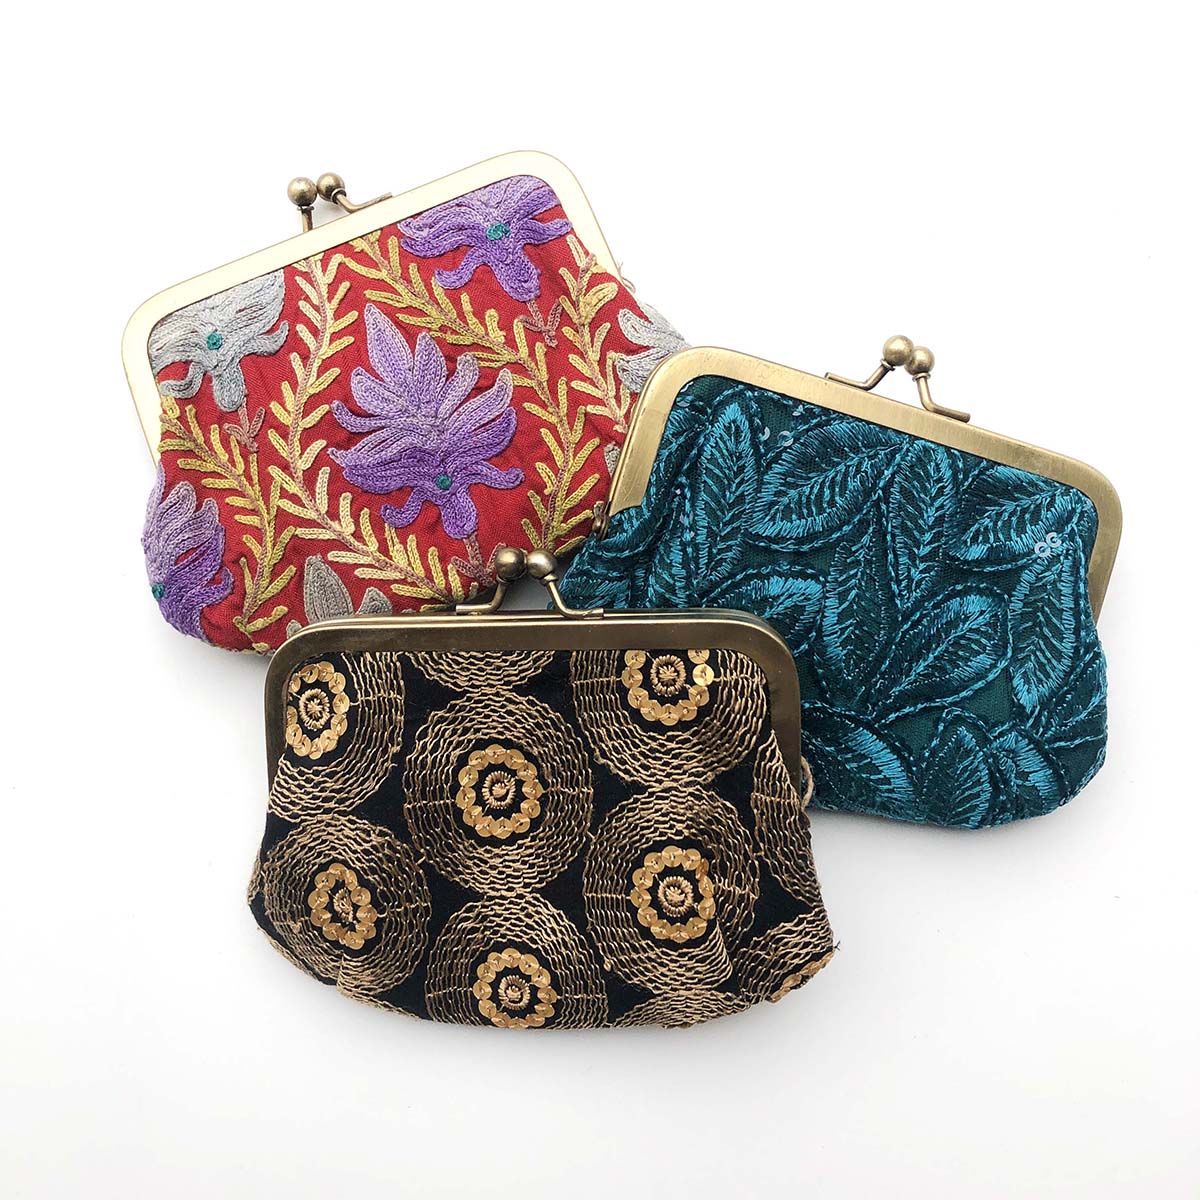 A trio of colorful patterned kisslock pouches.